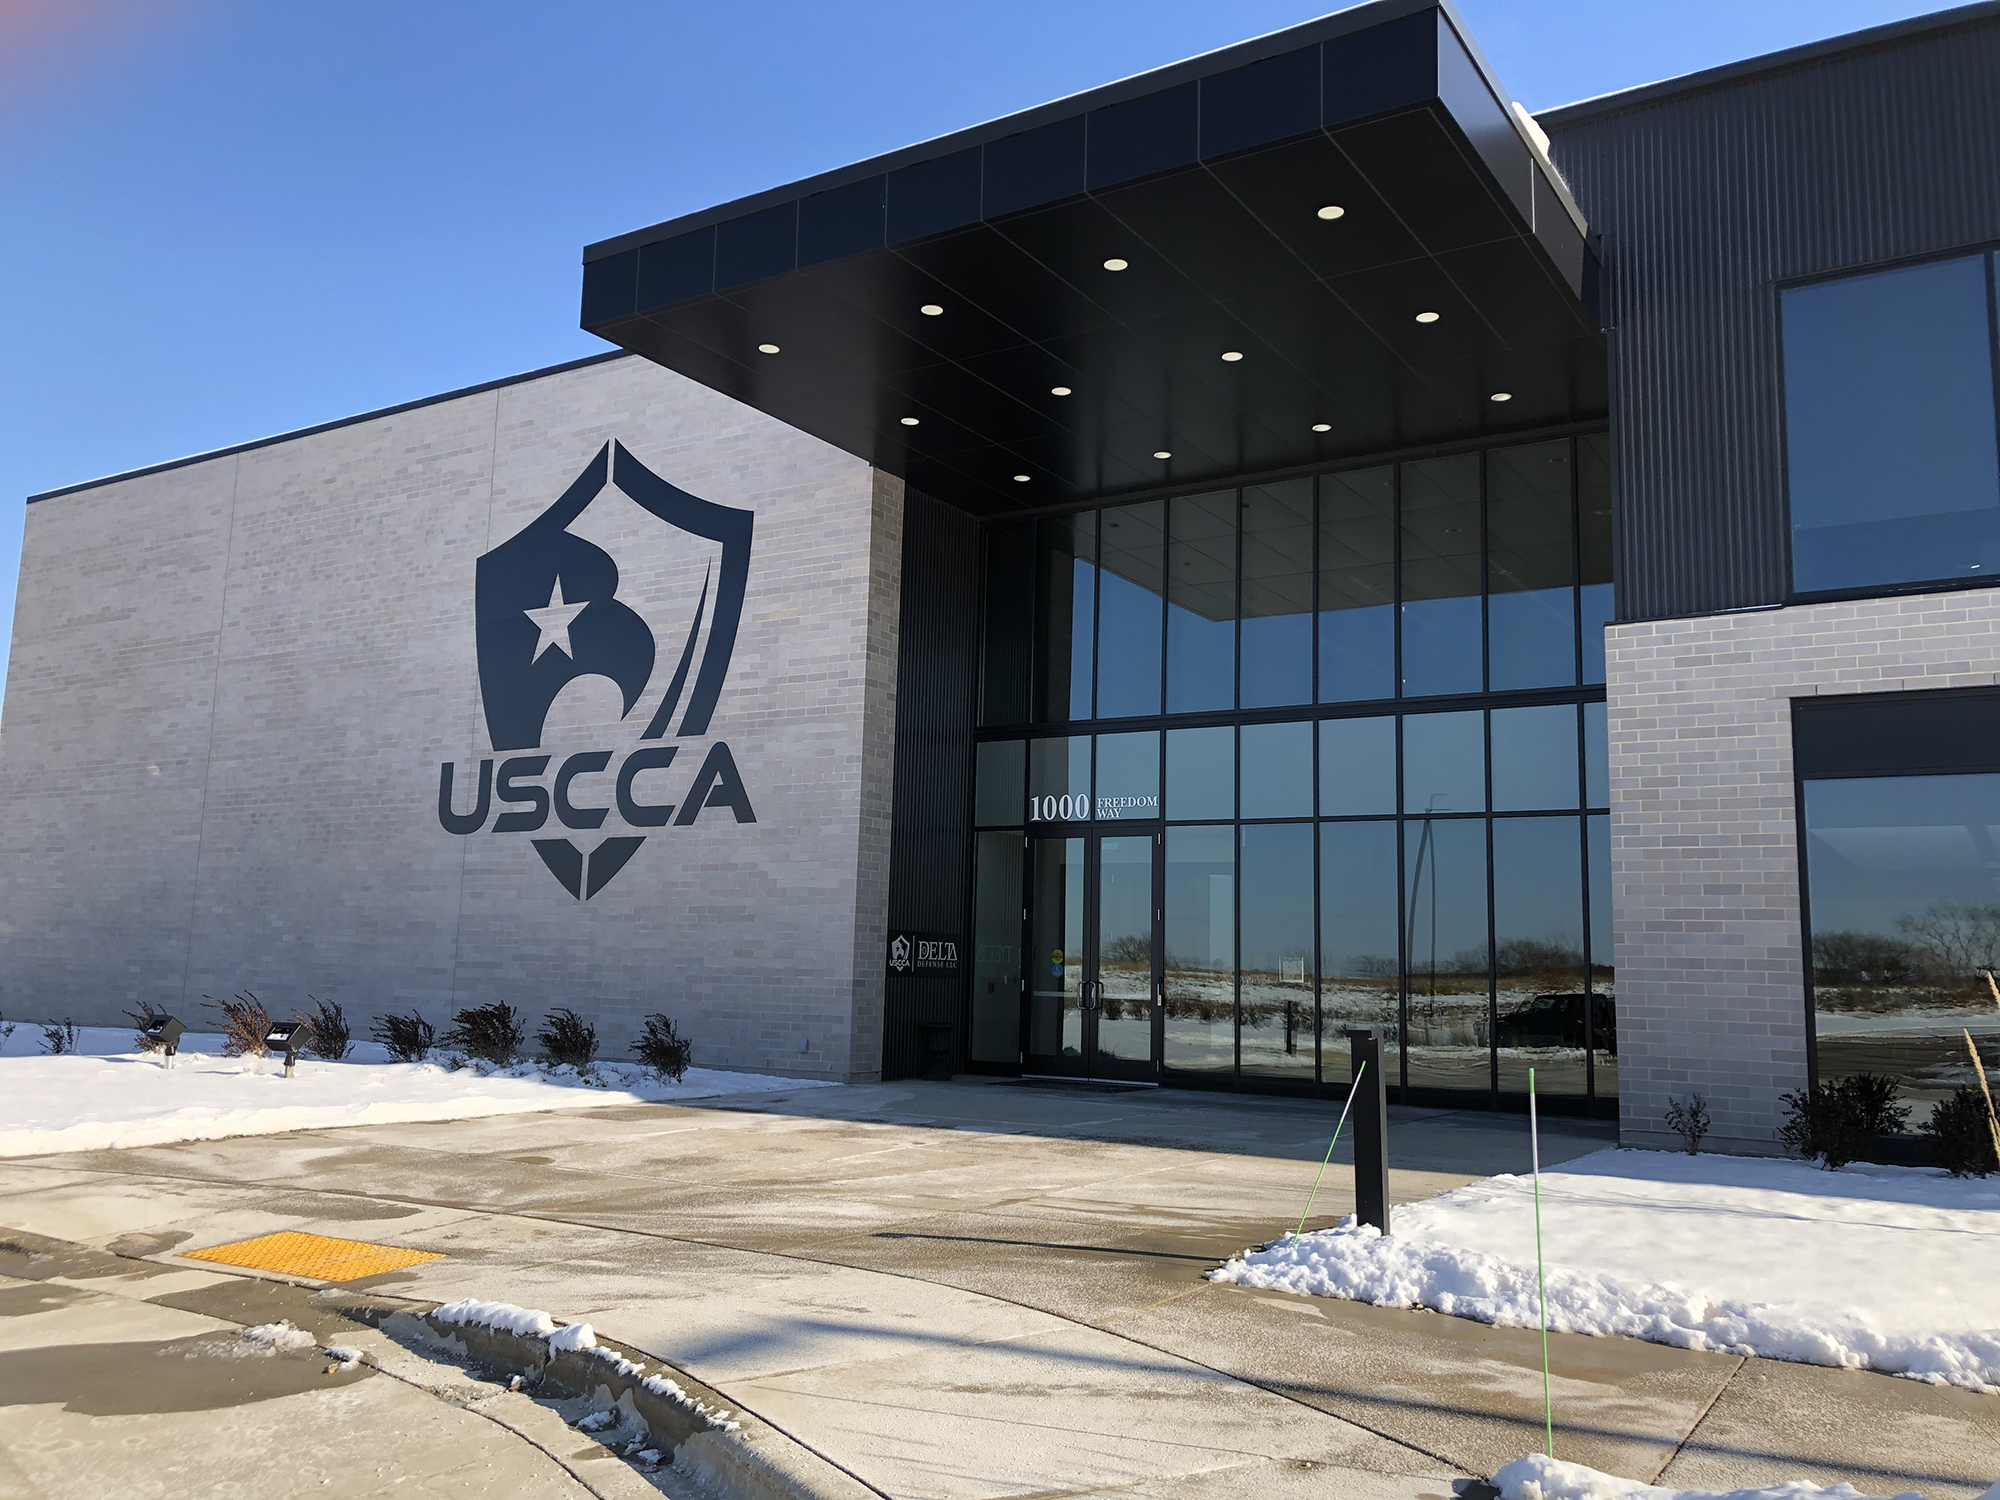 The USCCA headquarters in West Bend, Wisconsin